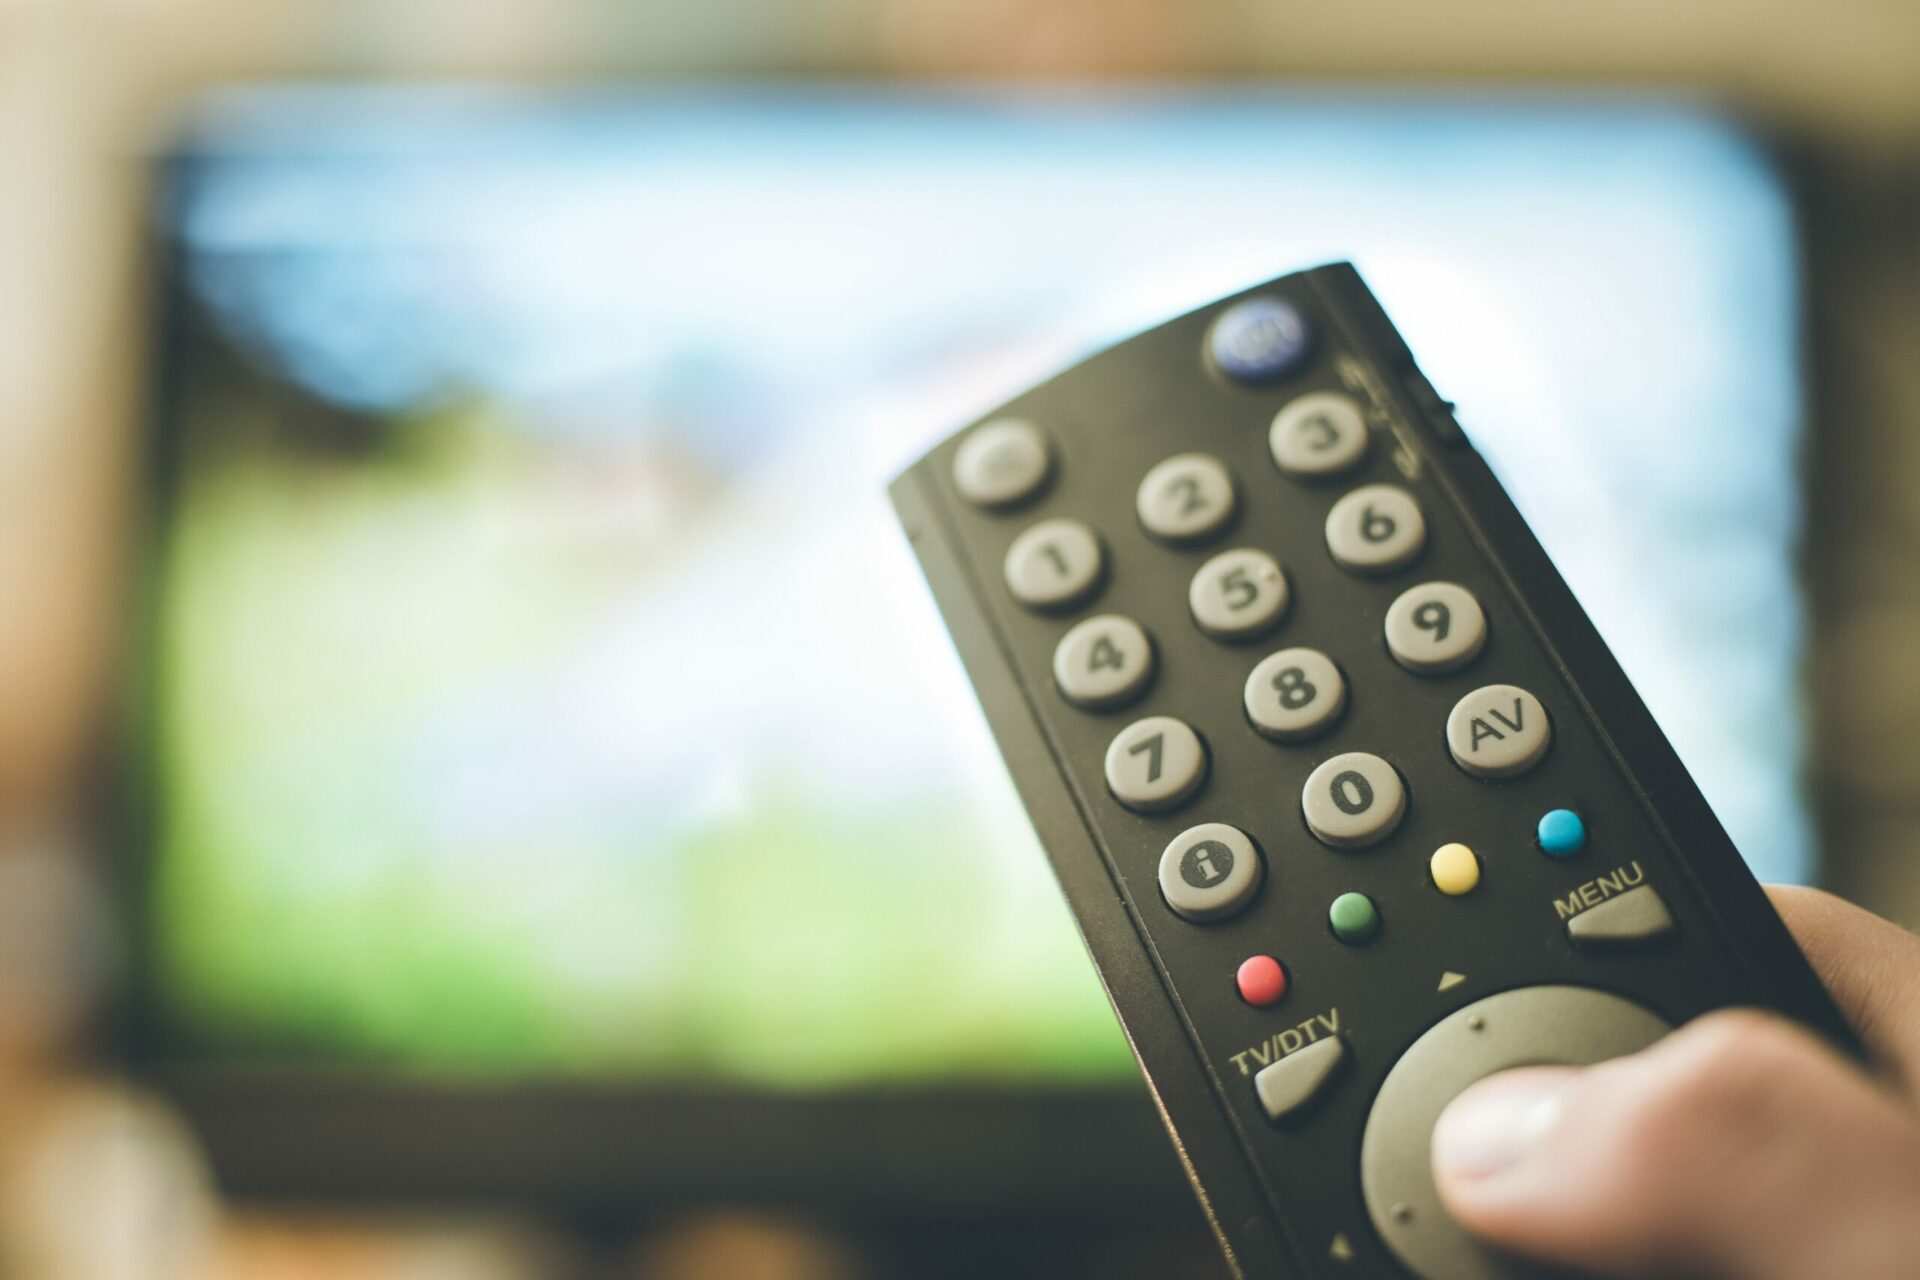 Television Q&A: Why does the music volume get so loud when watching TV?